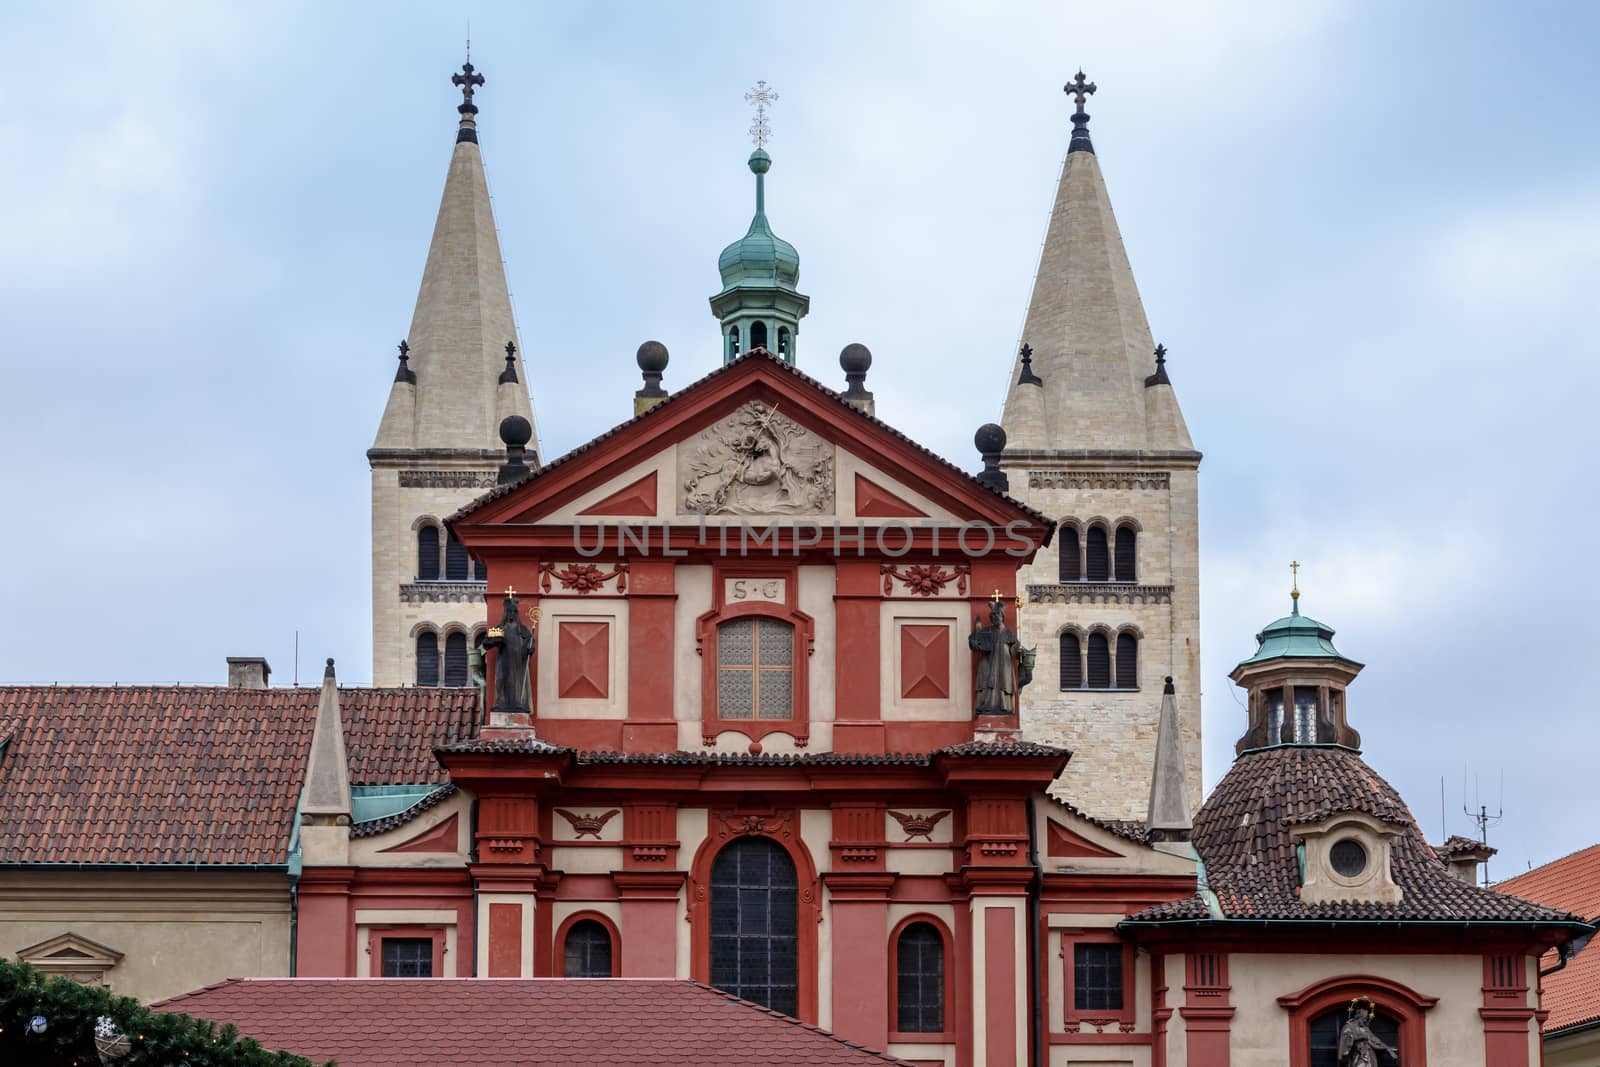 Front view of St George Basilica, the oldest living church built within Prag Castle, on cloudy sky background.